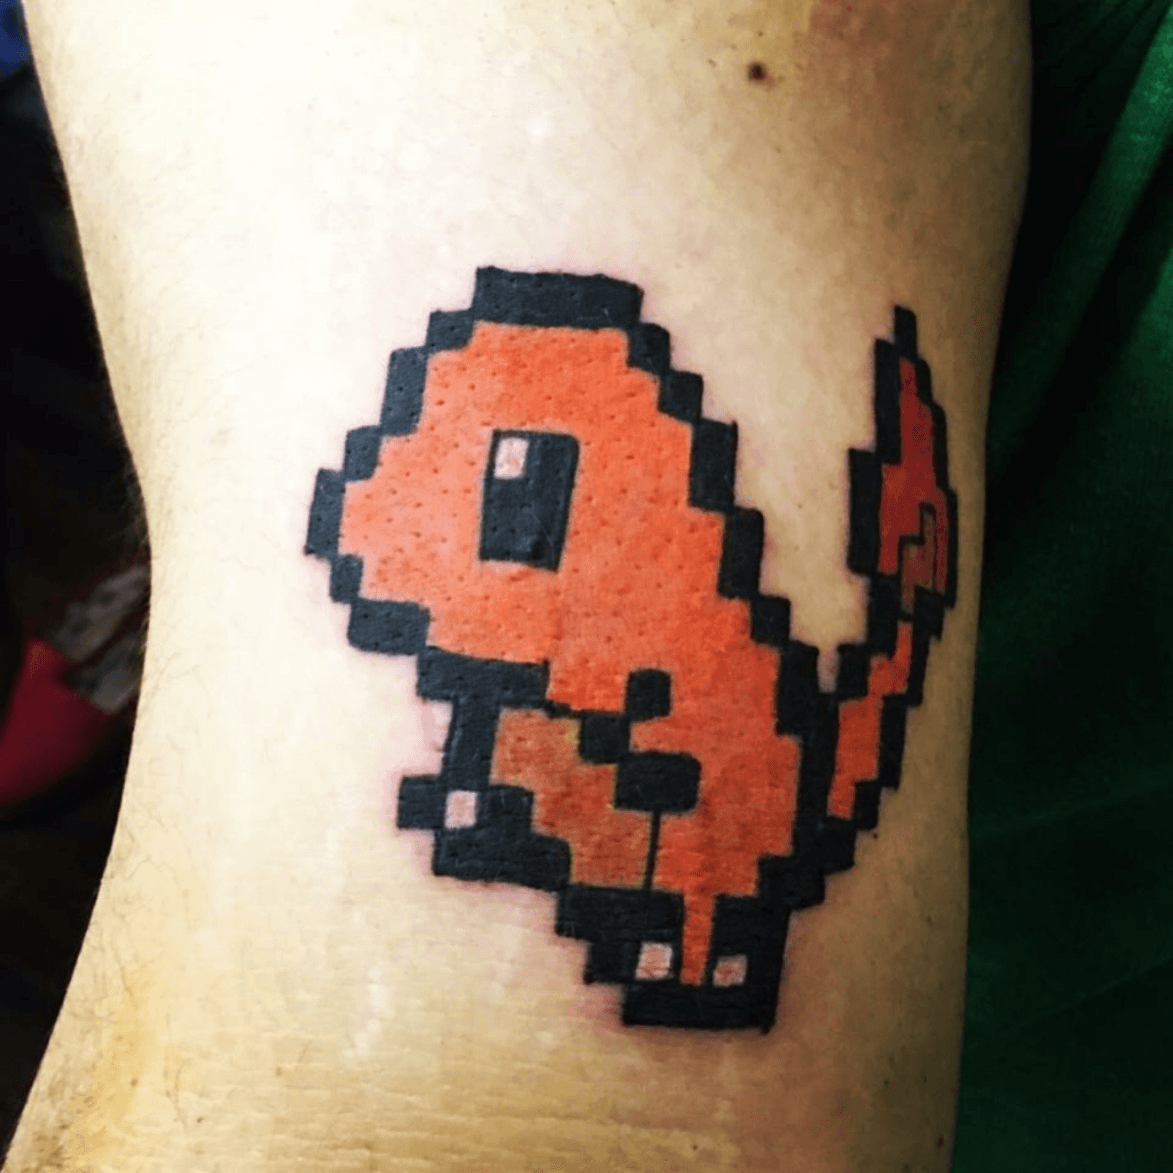 Time Bomb Tattoos  Curiosities  Do you have a favorite Pokémon Colin  helped his client show their love for Cyndaquil with this healed 8bit  style tattoo  Check out his Instagram